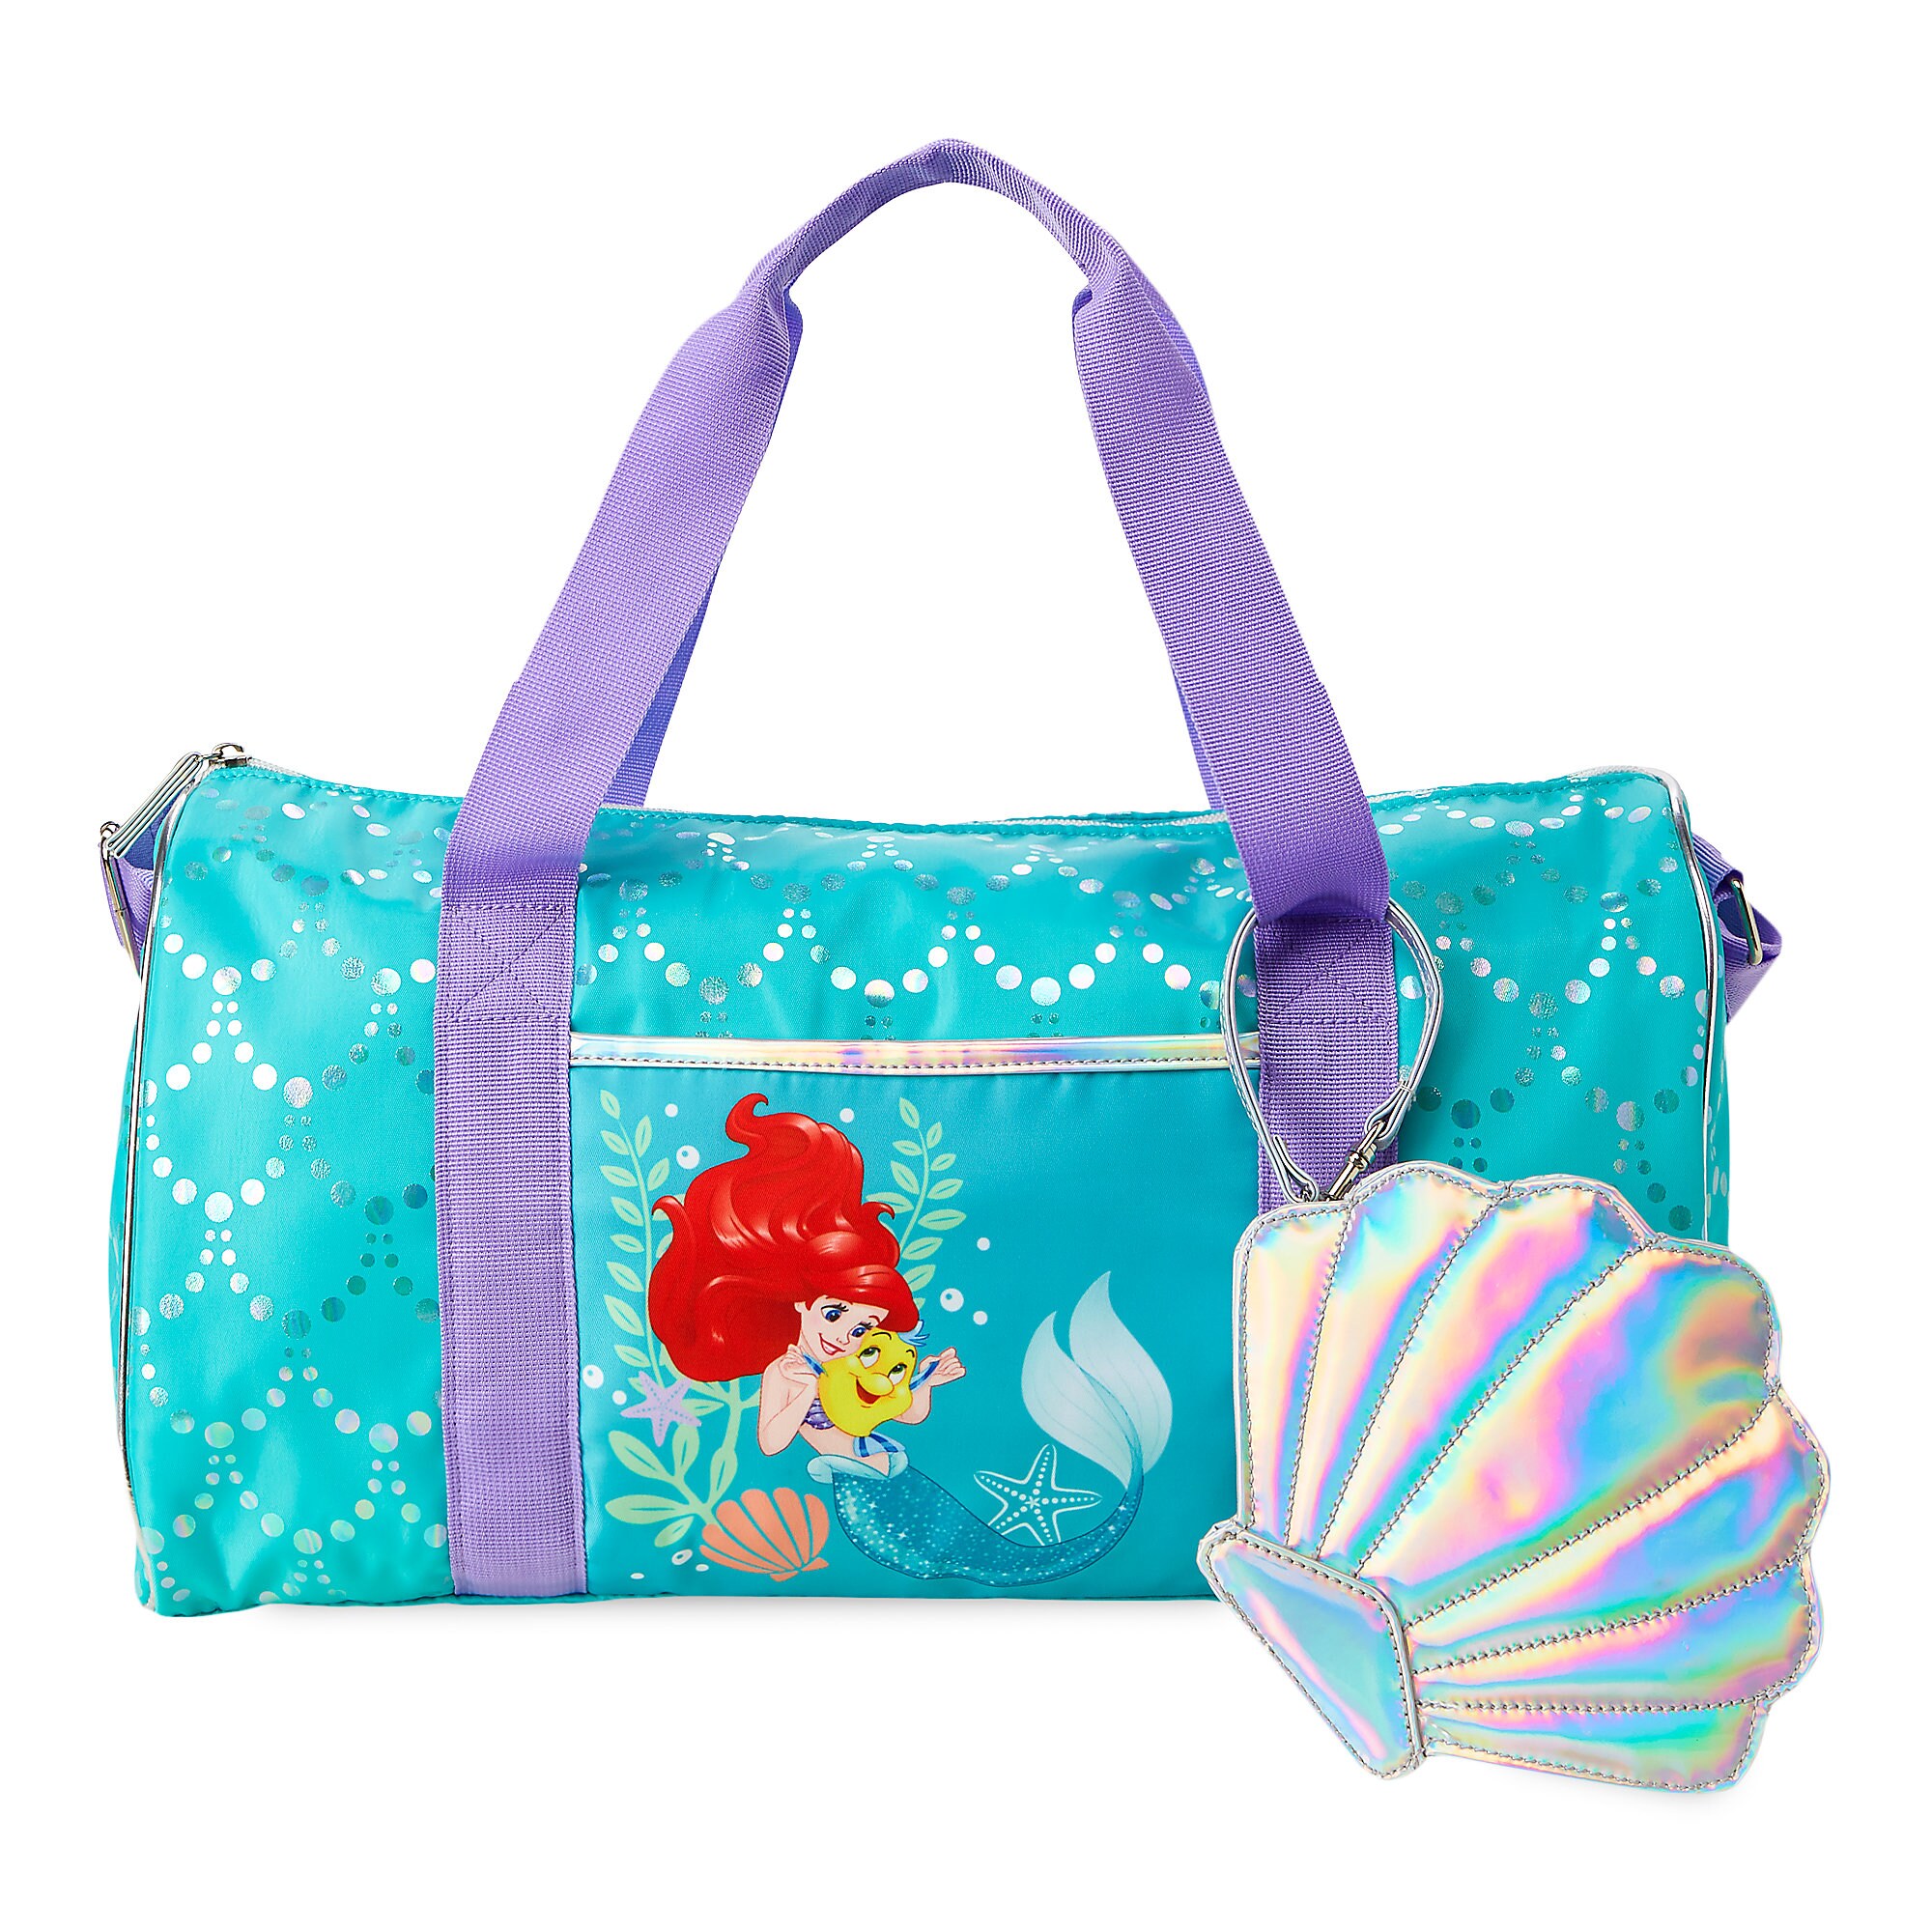 Ariel and Flounder Duffle Bag for Kids - The Little Mermaid